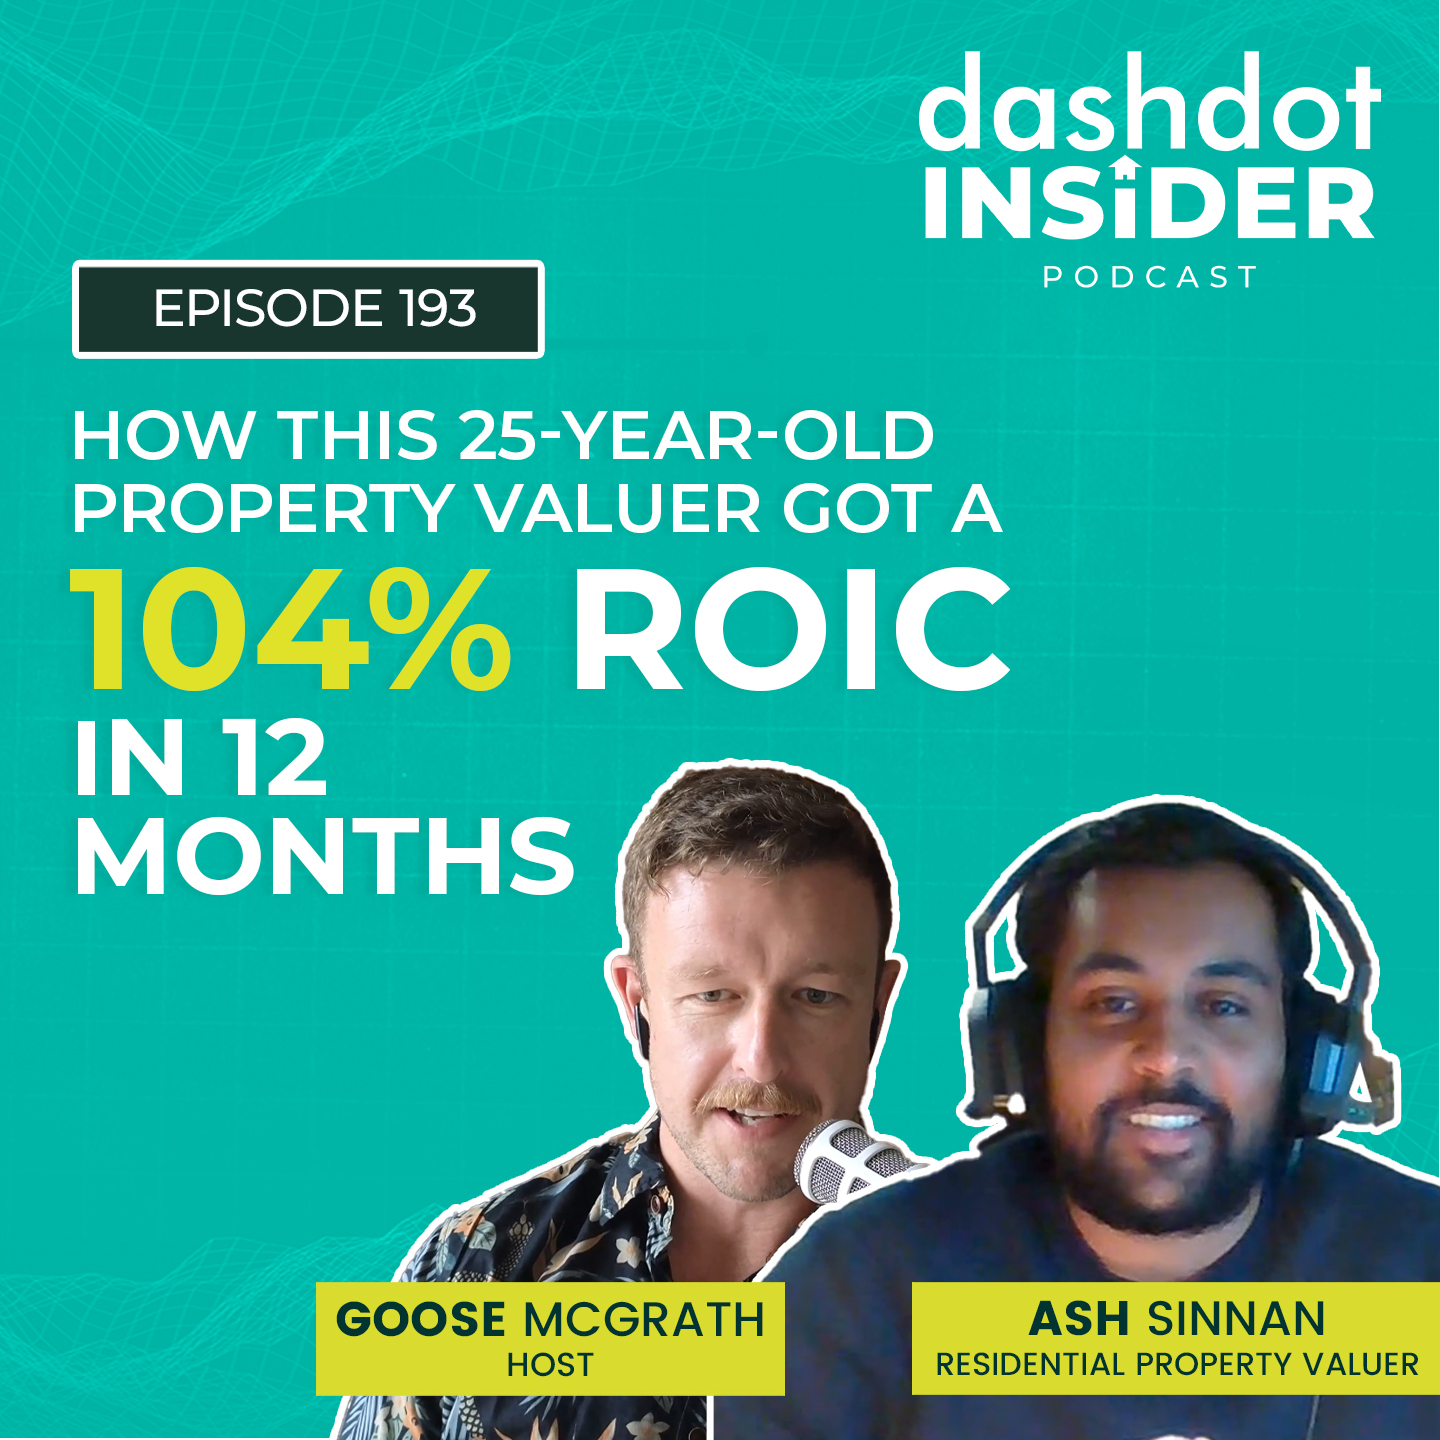 How This 25-year-old Property Valuer got a 104% ROIC In 12 Months w/ Ash Sinnan | Investor Stories #193